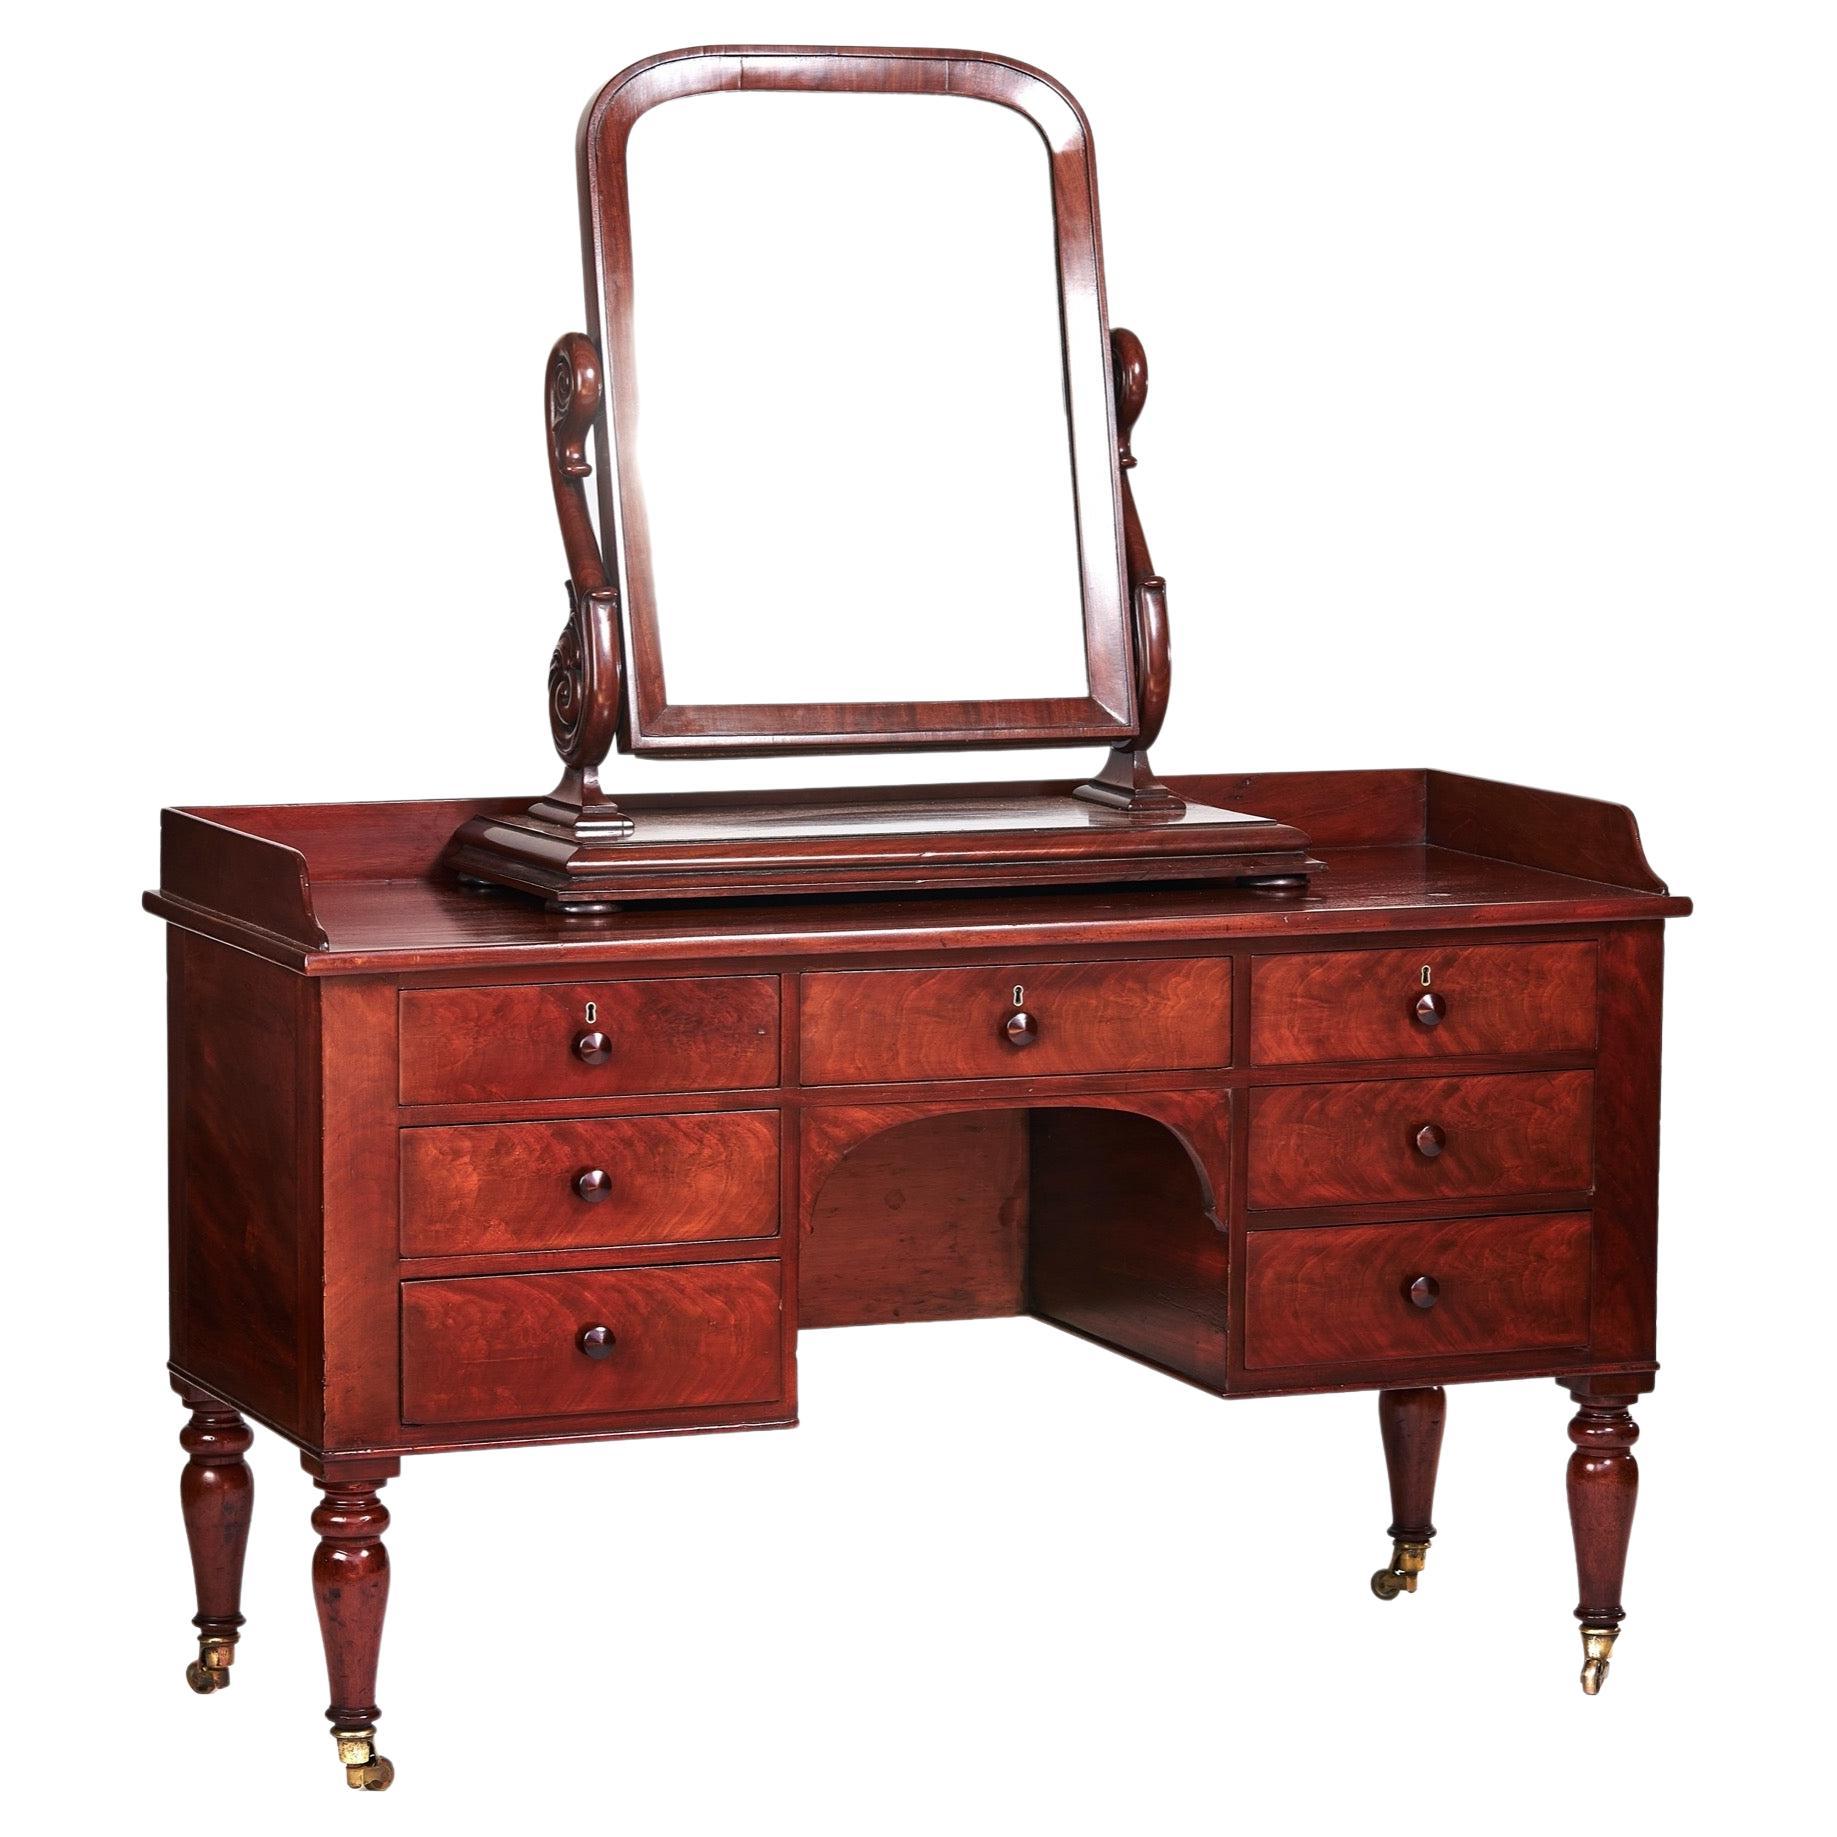 Mahogany Kneehole Dressing Table by Wilkinsons